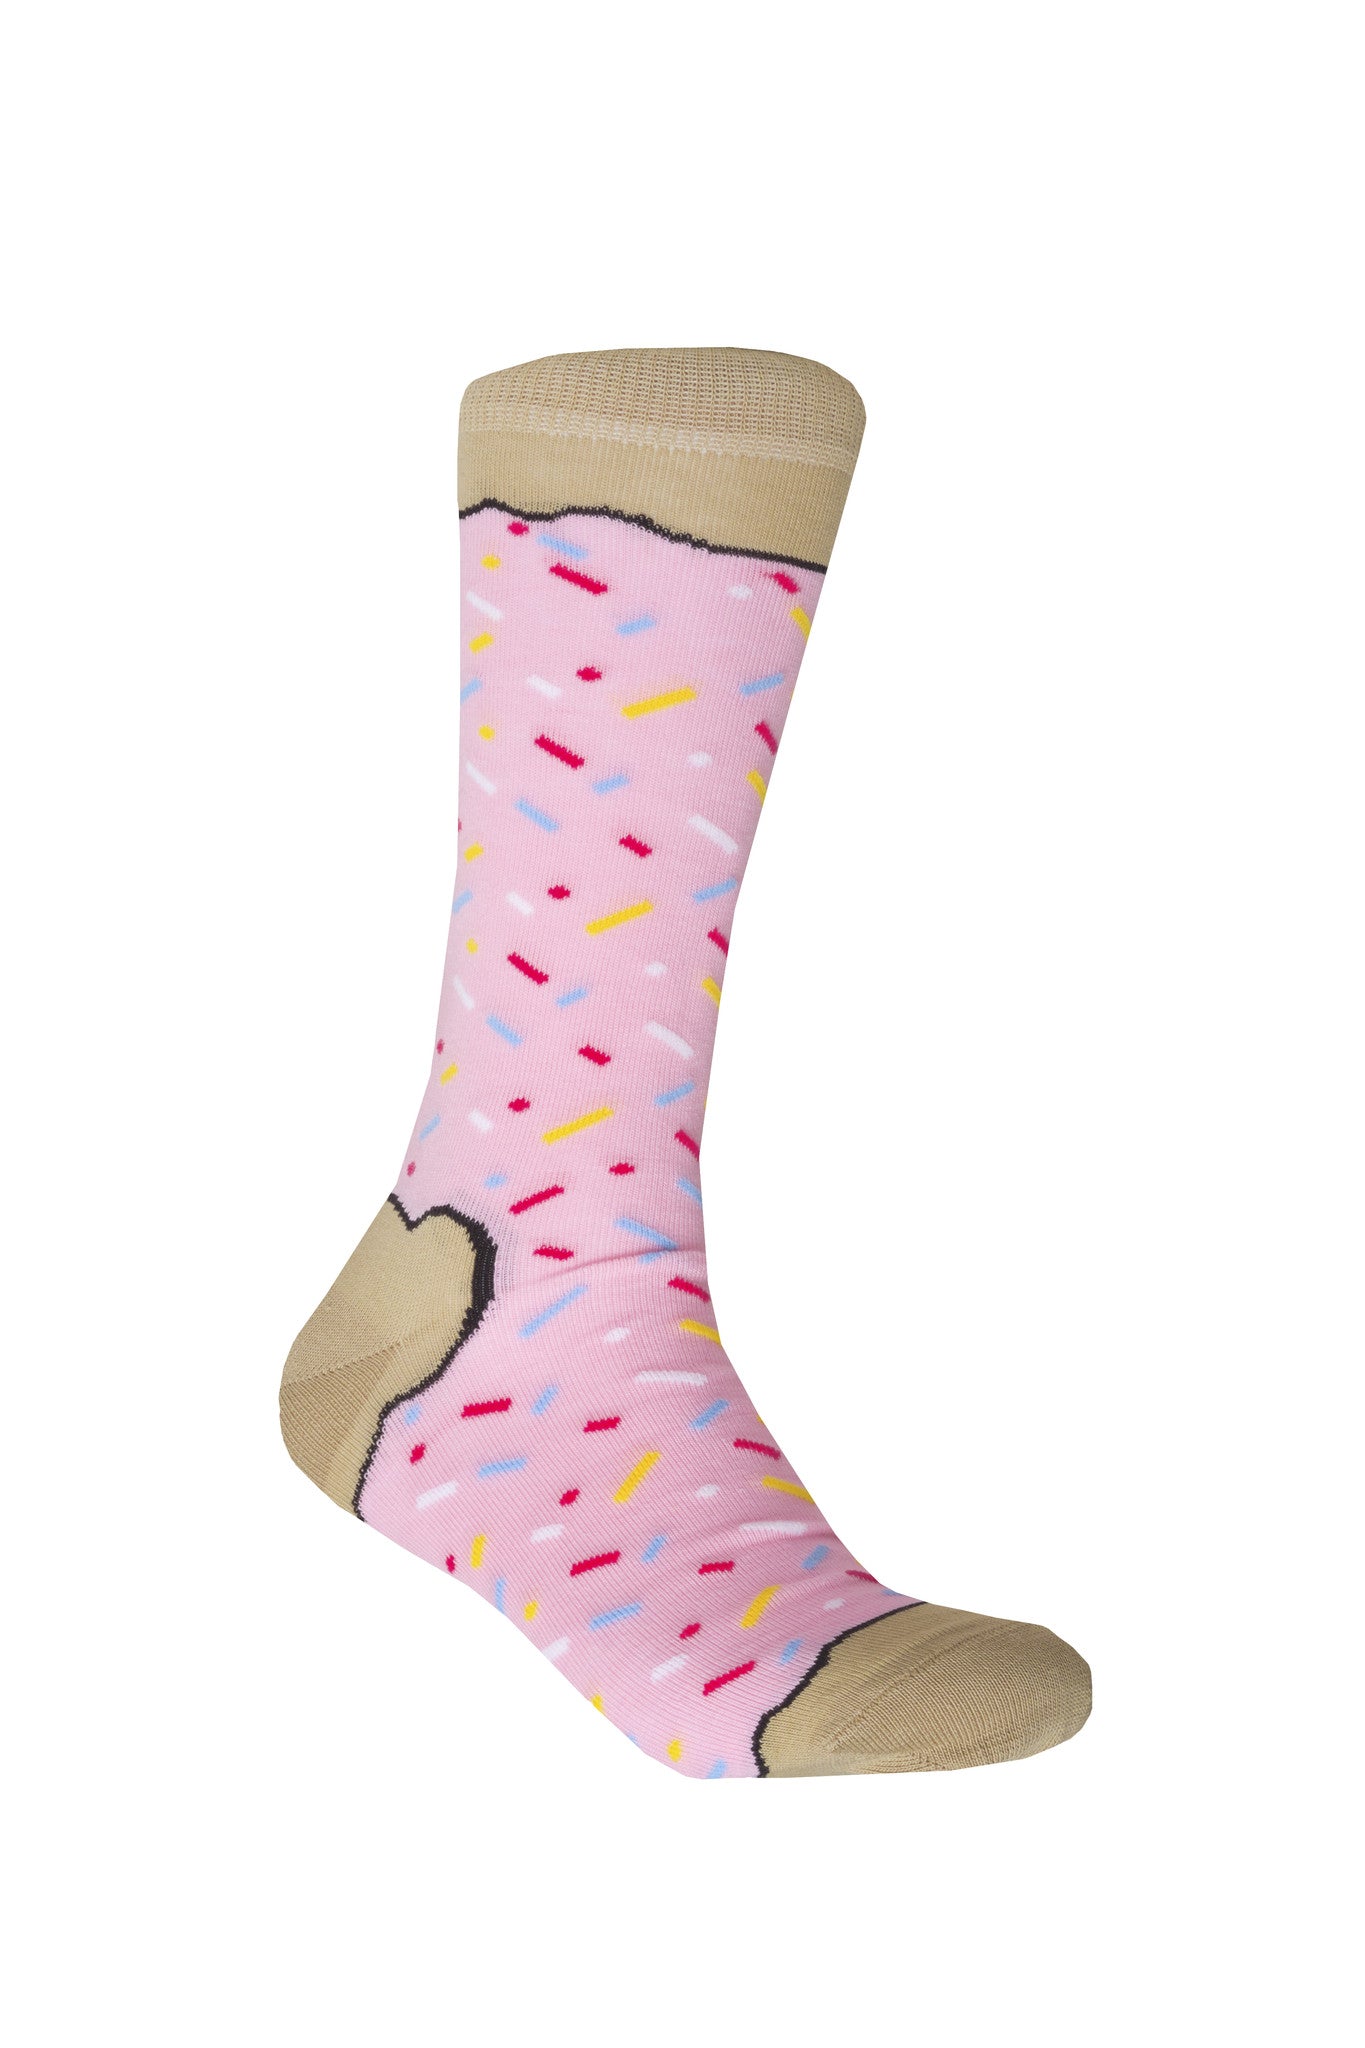 Giraffecool-giraffe-cool-brand-strawberry-donut-pink-light-cream-and-colour-sparkles-Mercerized-And-Brushed-Cotton-Fashion-Socks-Front